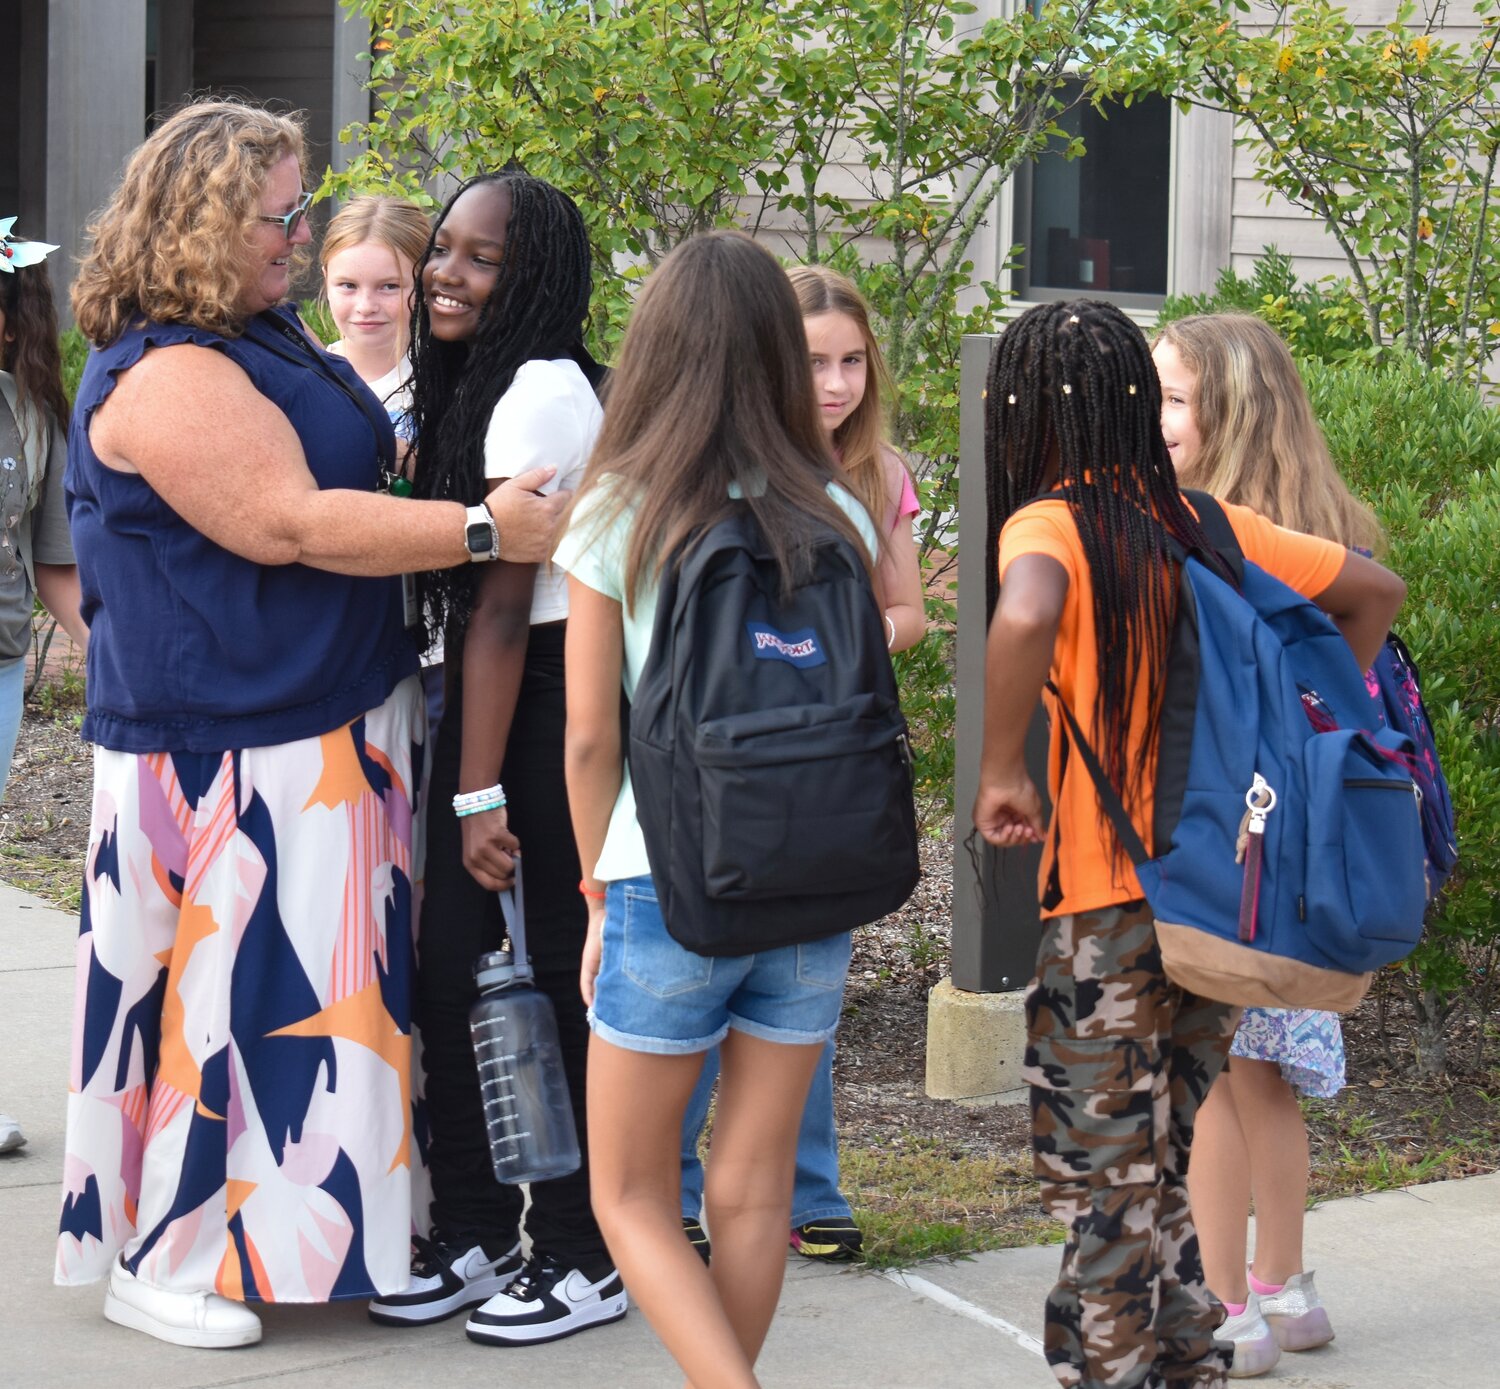 Nantucket Public Schools staff welcomed students as they returned to campus for the first day of school Tuesday morning.